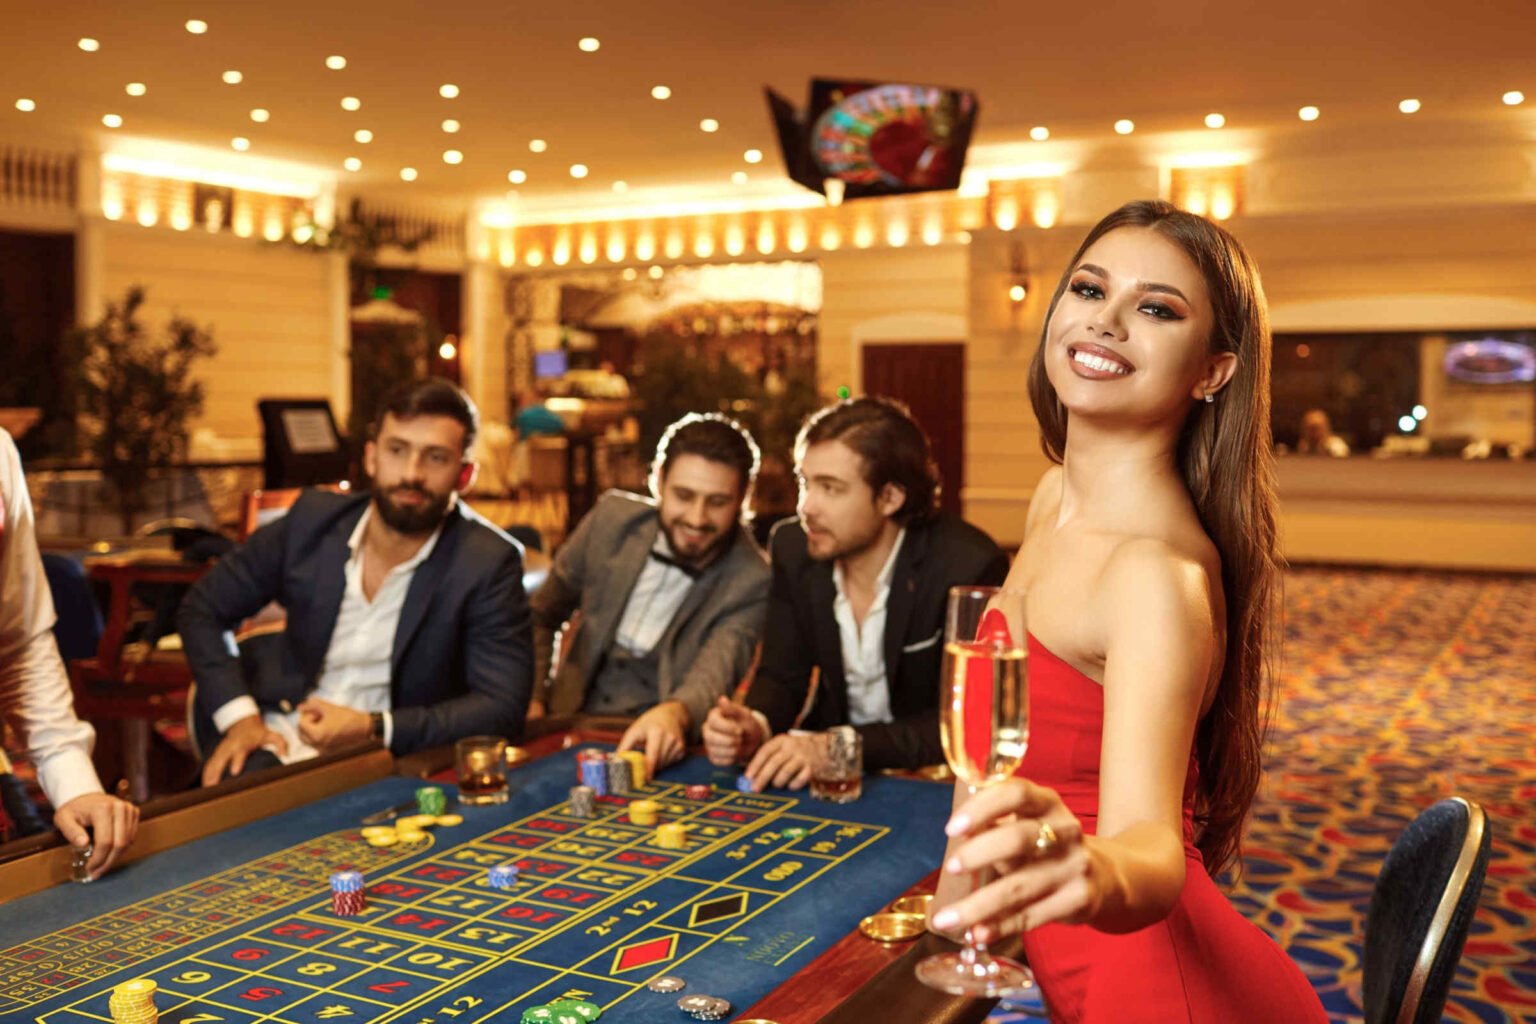 Ready to risk it all to win big by playing Yes8 SG? Here's how placing your bets on this fan-favorite online casino in Singapore will pay off!